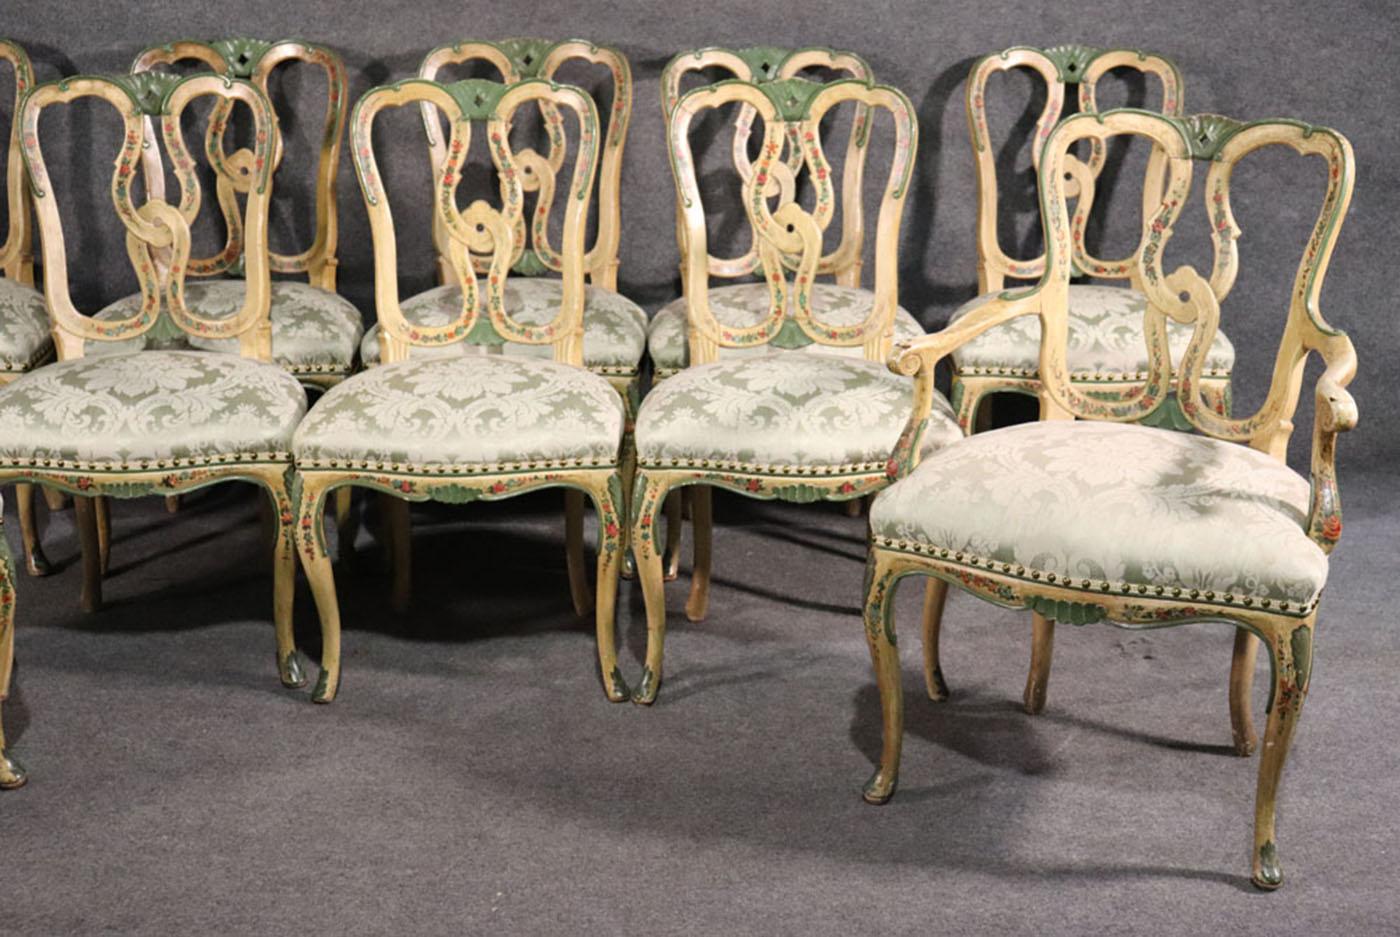 This is a rare set of antique Venetian paint decorated dining chairs from the 1930s era. They are beautifully painted and some have slightly different floral decorations. This set is strong and sturdy and each seat is upholstered in silk. The chairs